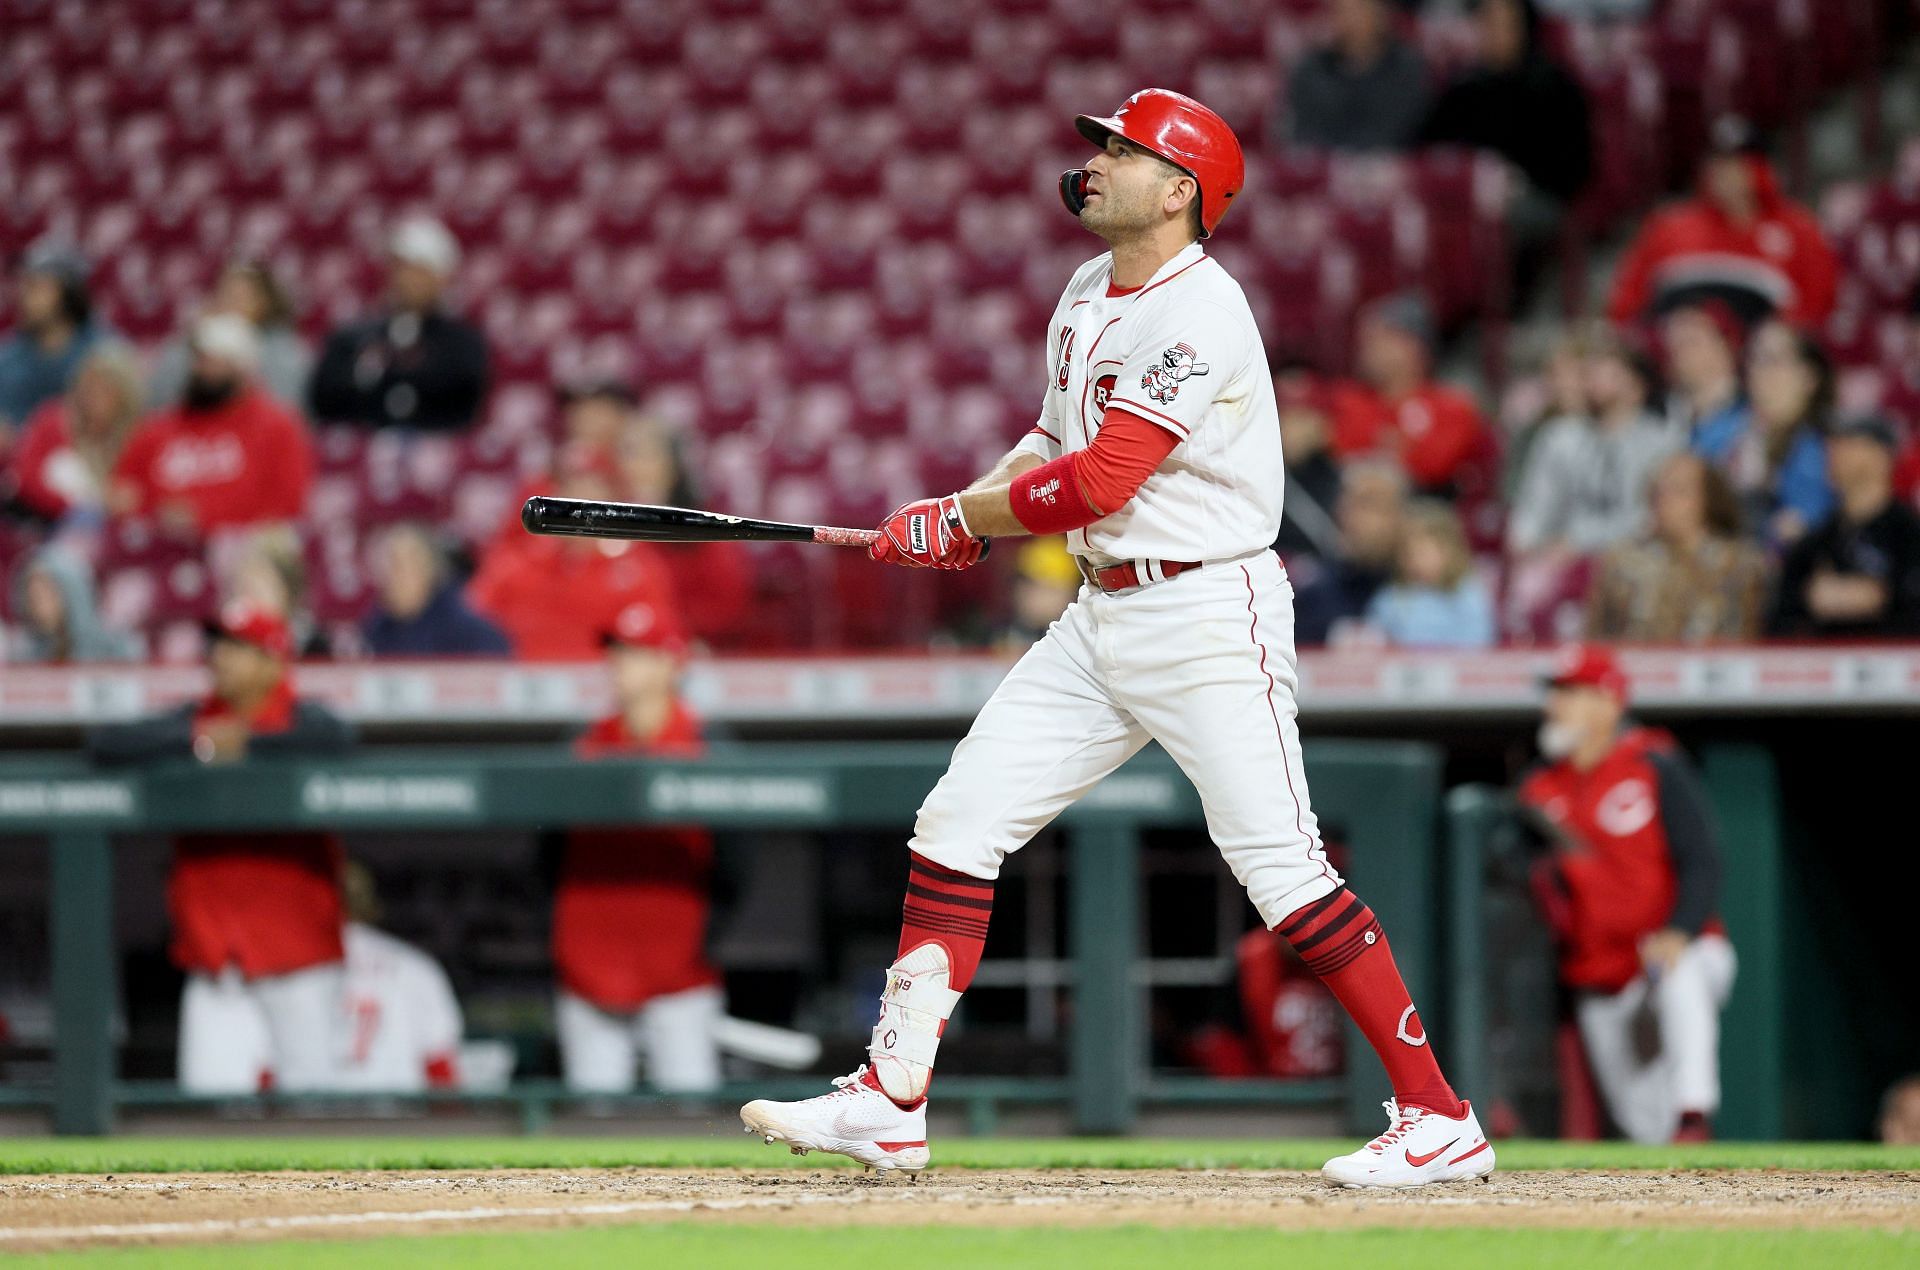 Reds first baseman Votto will end his career soon and will likely never again see the postseason, at least not with the Reds